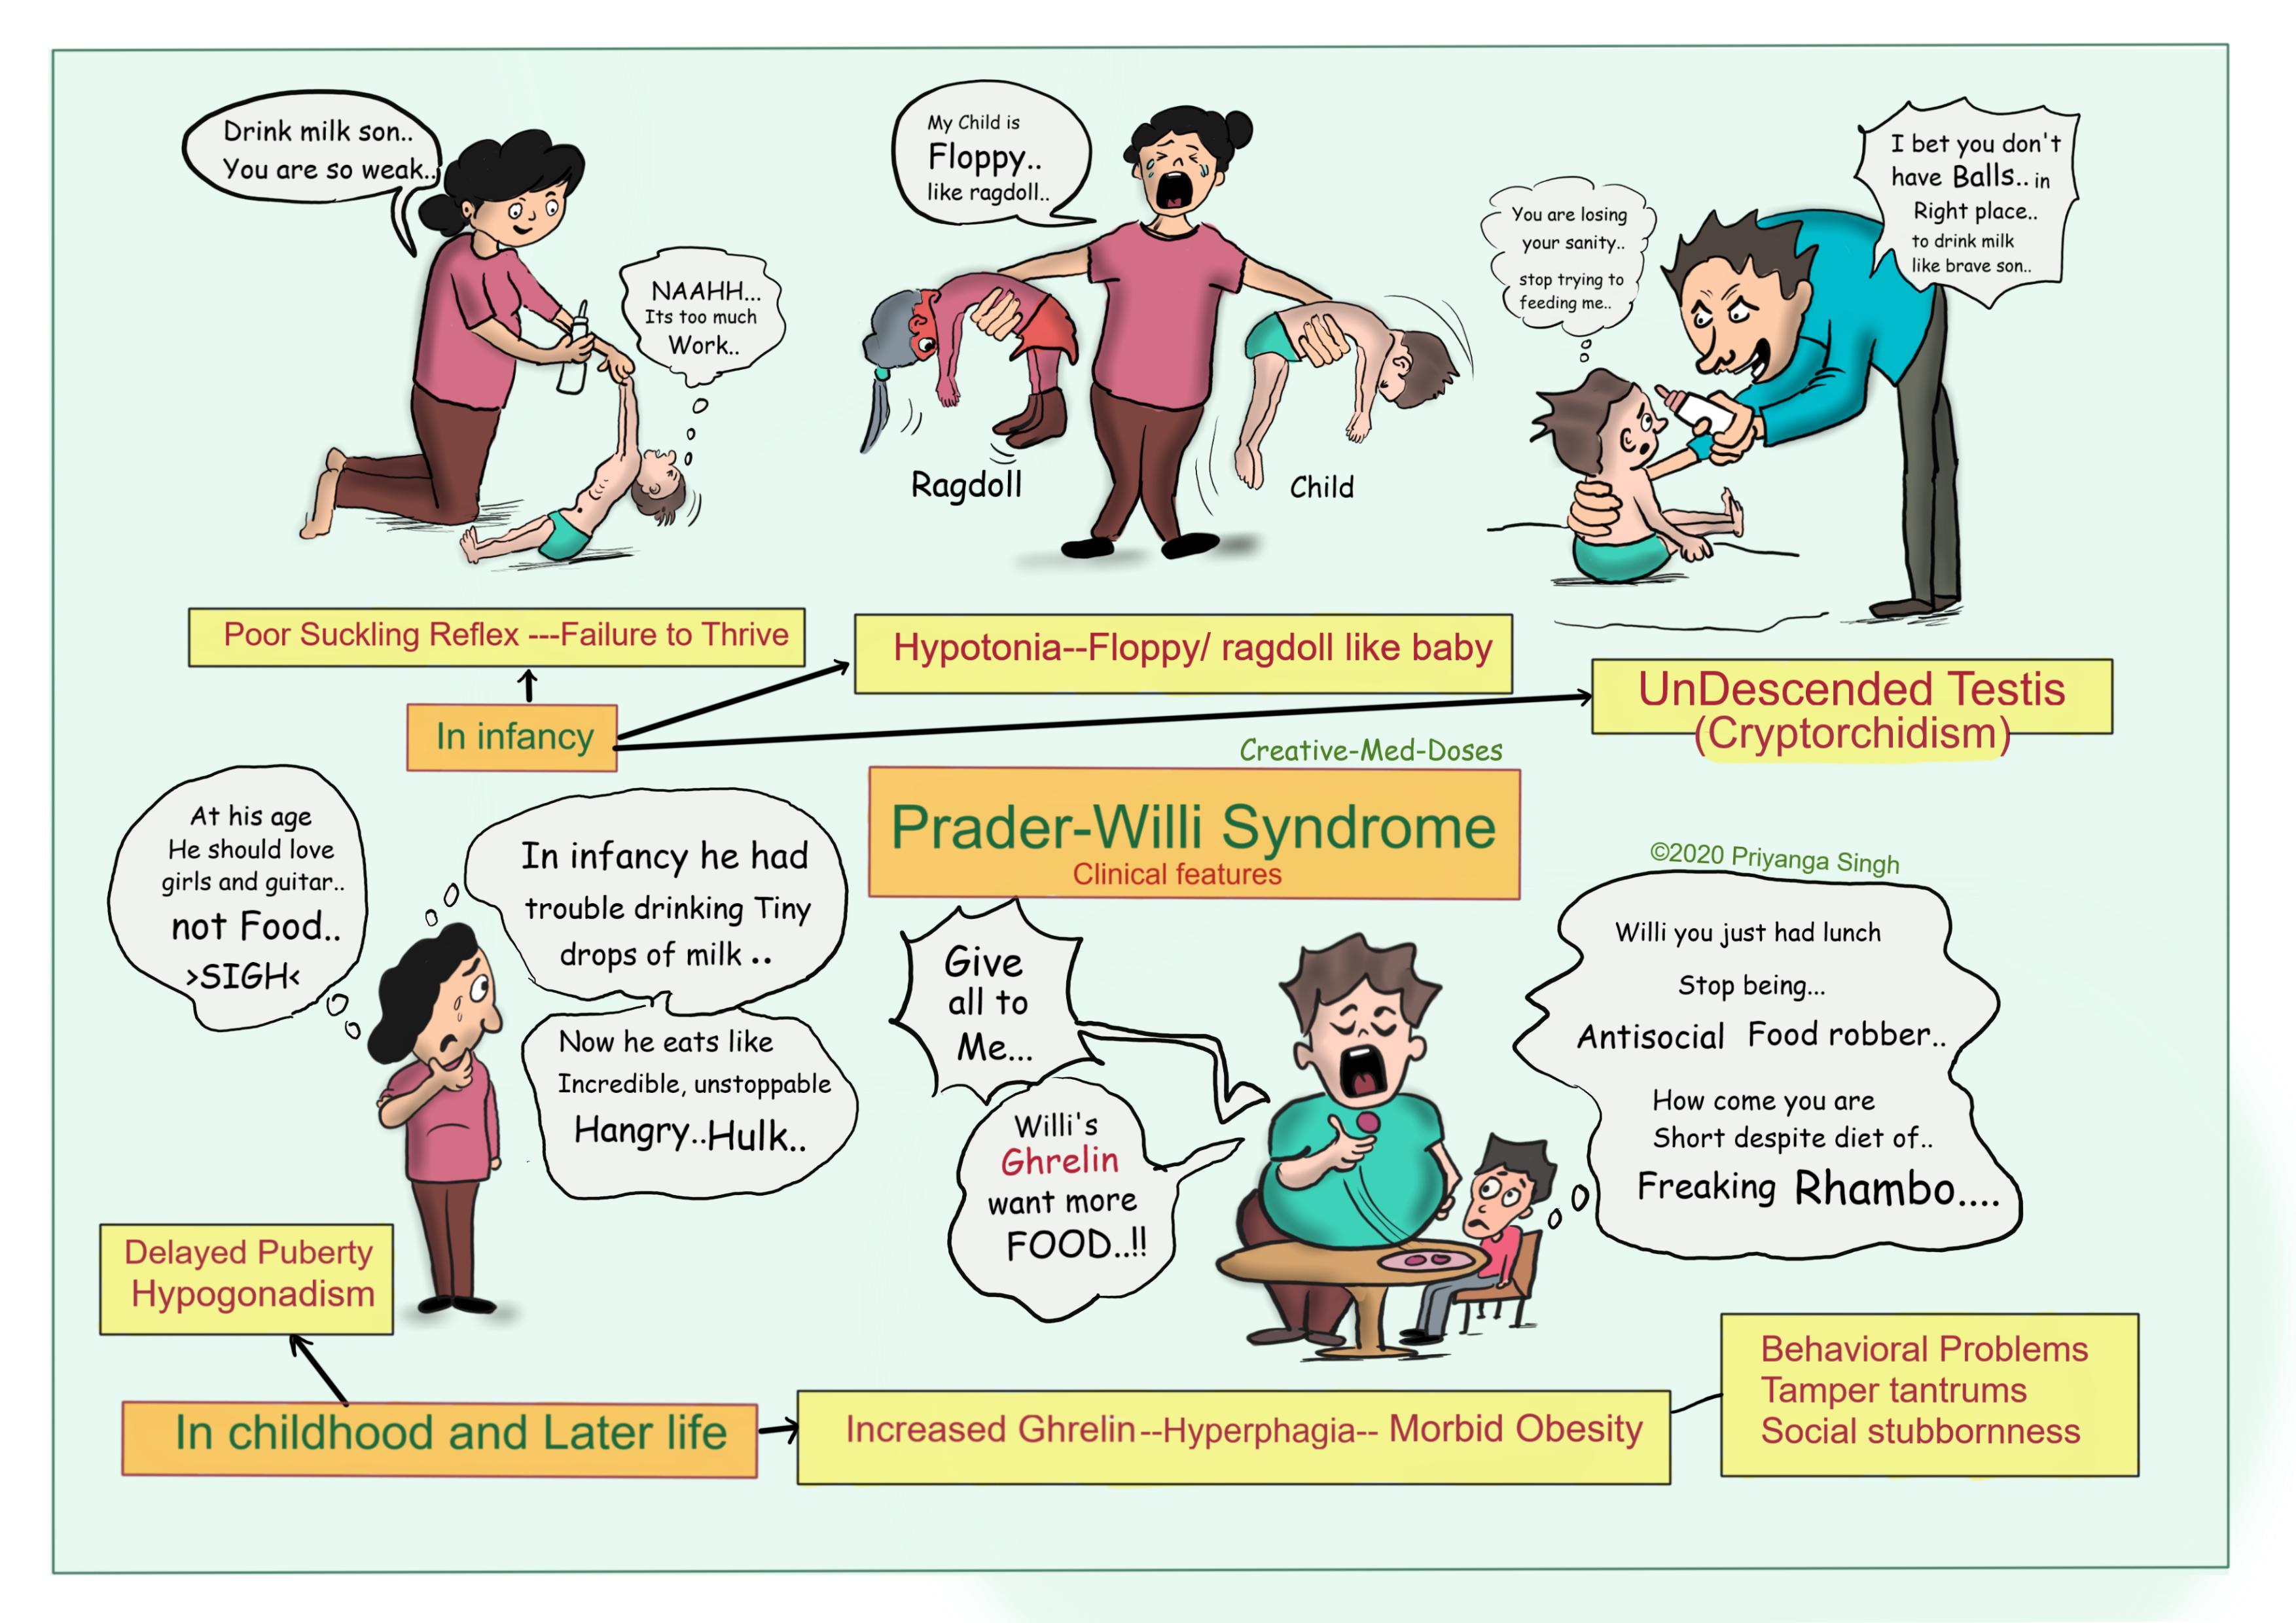 Prader-Willi syndrome: Clinical features 